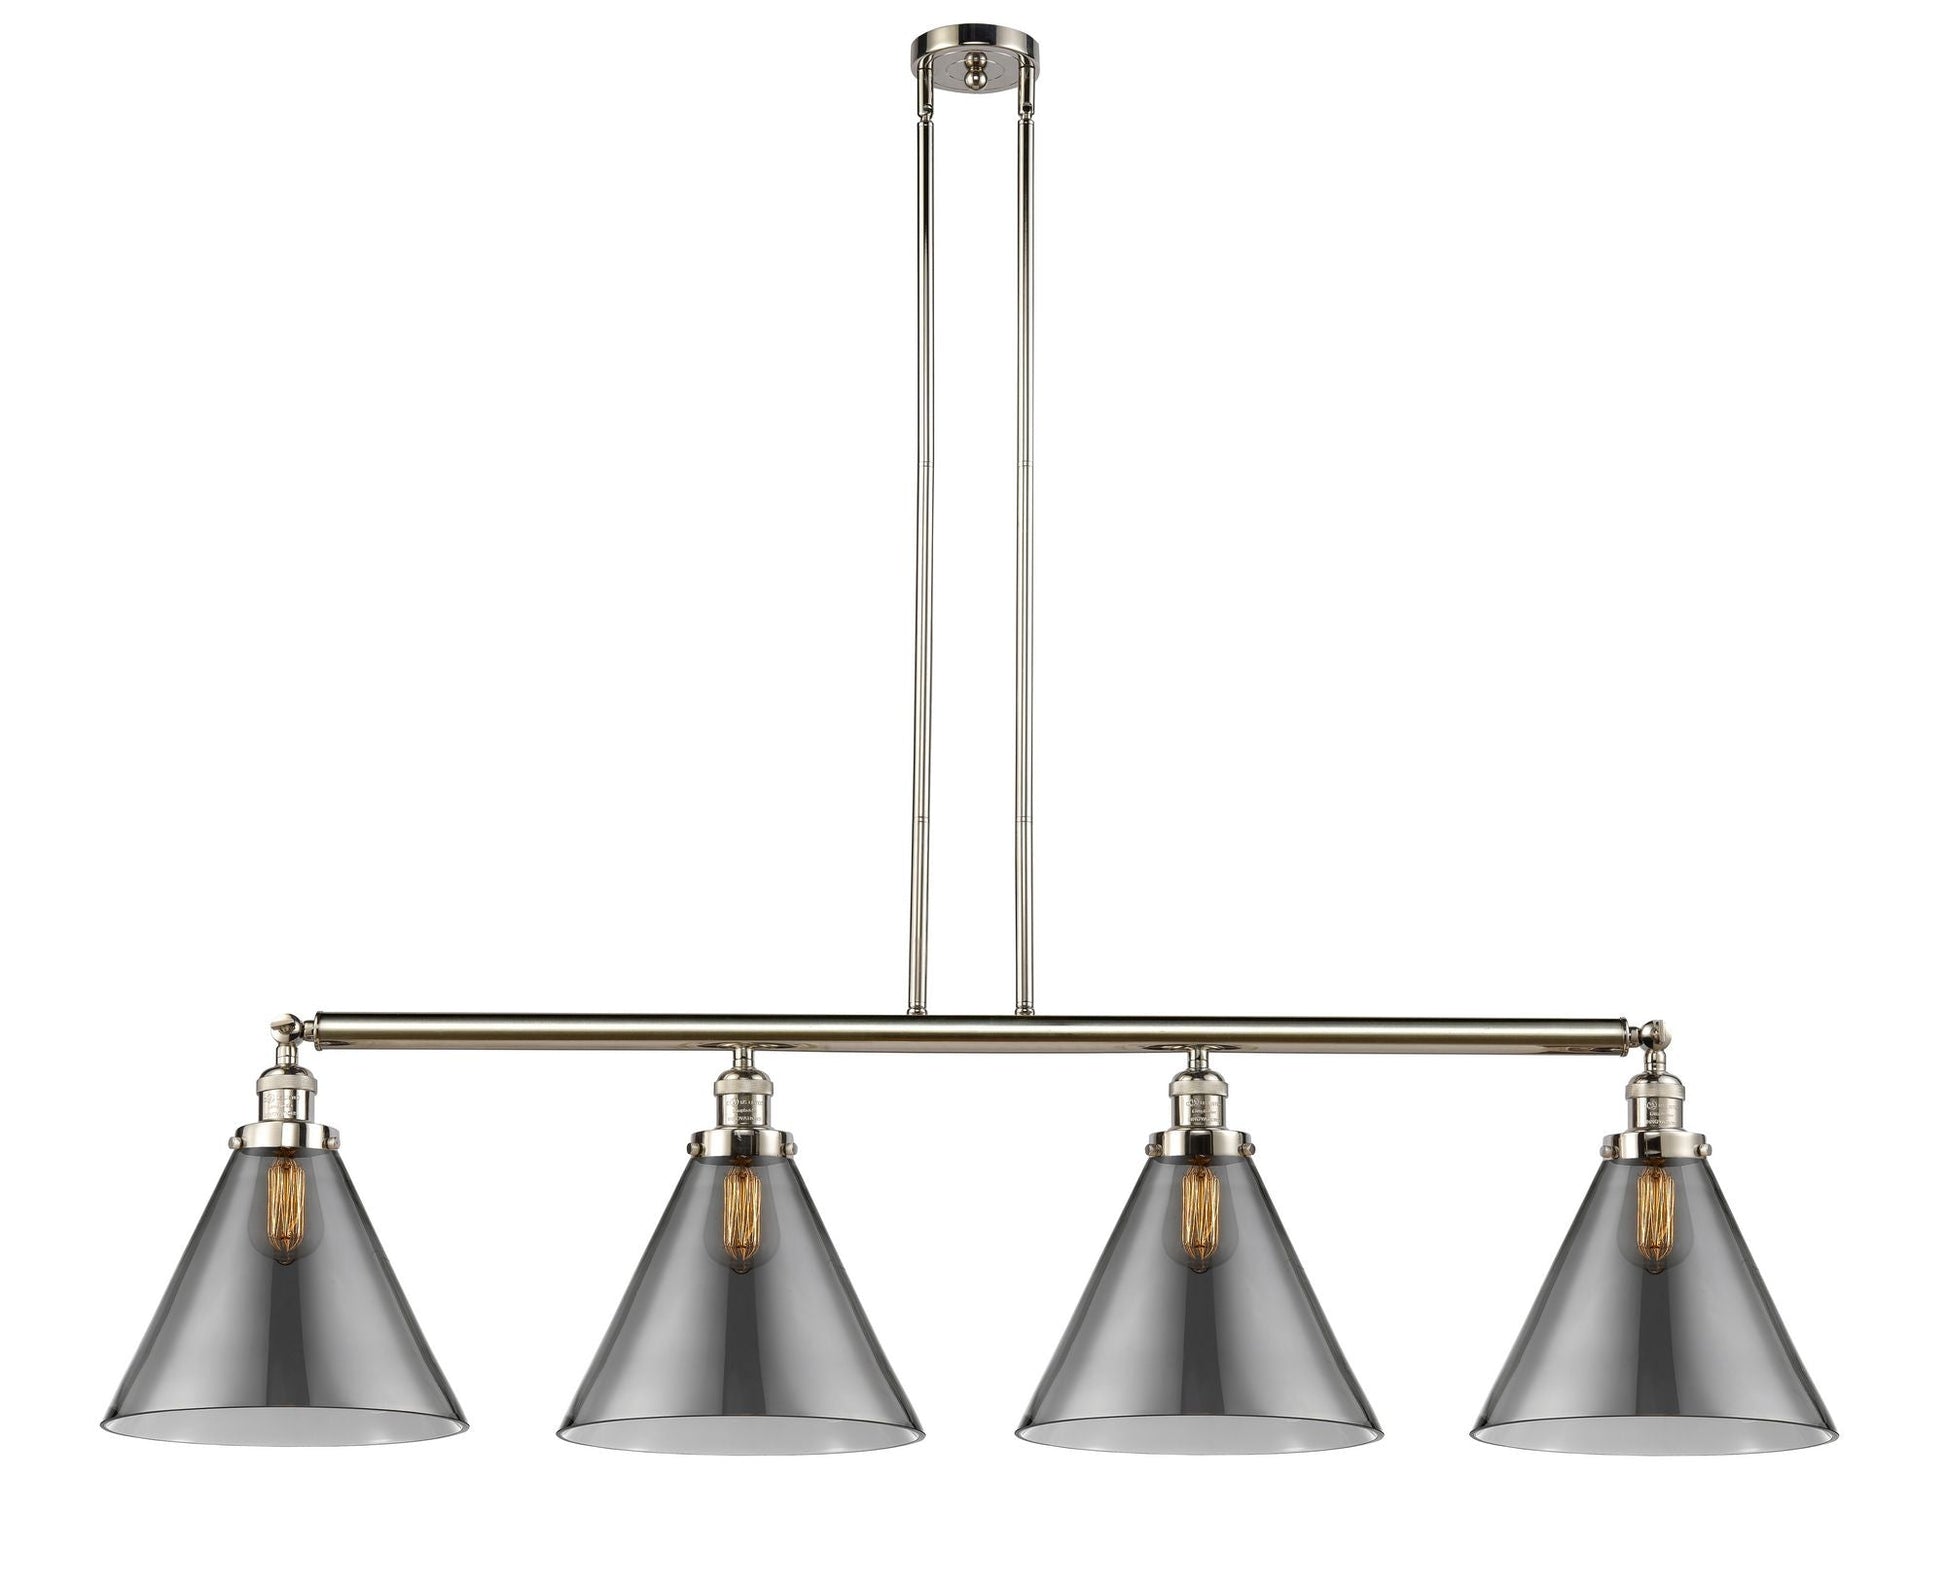 214-PN-G43-L 4-Light 56" Polished Nickel Island Light - Plated Smoke Cone 12" Glass - LED Bulb - Dimmensions: 56 x 12 x 14<br>Minimum Height : 24.25<br>Maximum Height : 48.25 - Sloped Ceiling Compatible: Yes